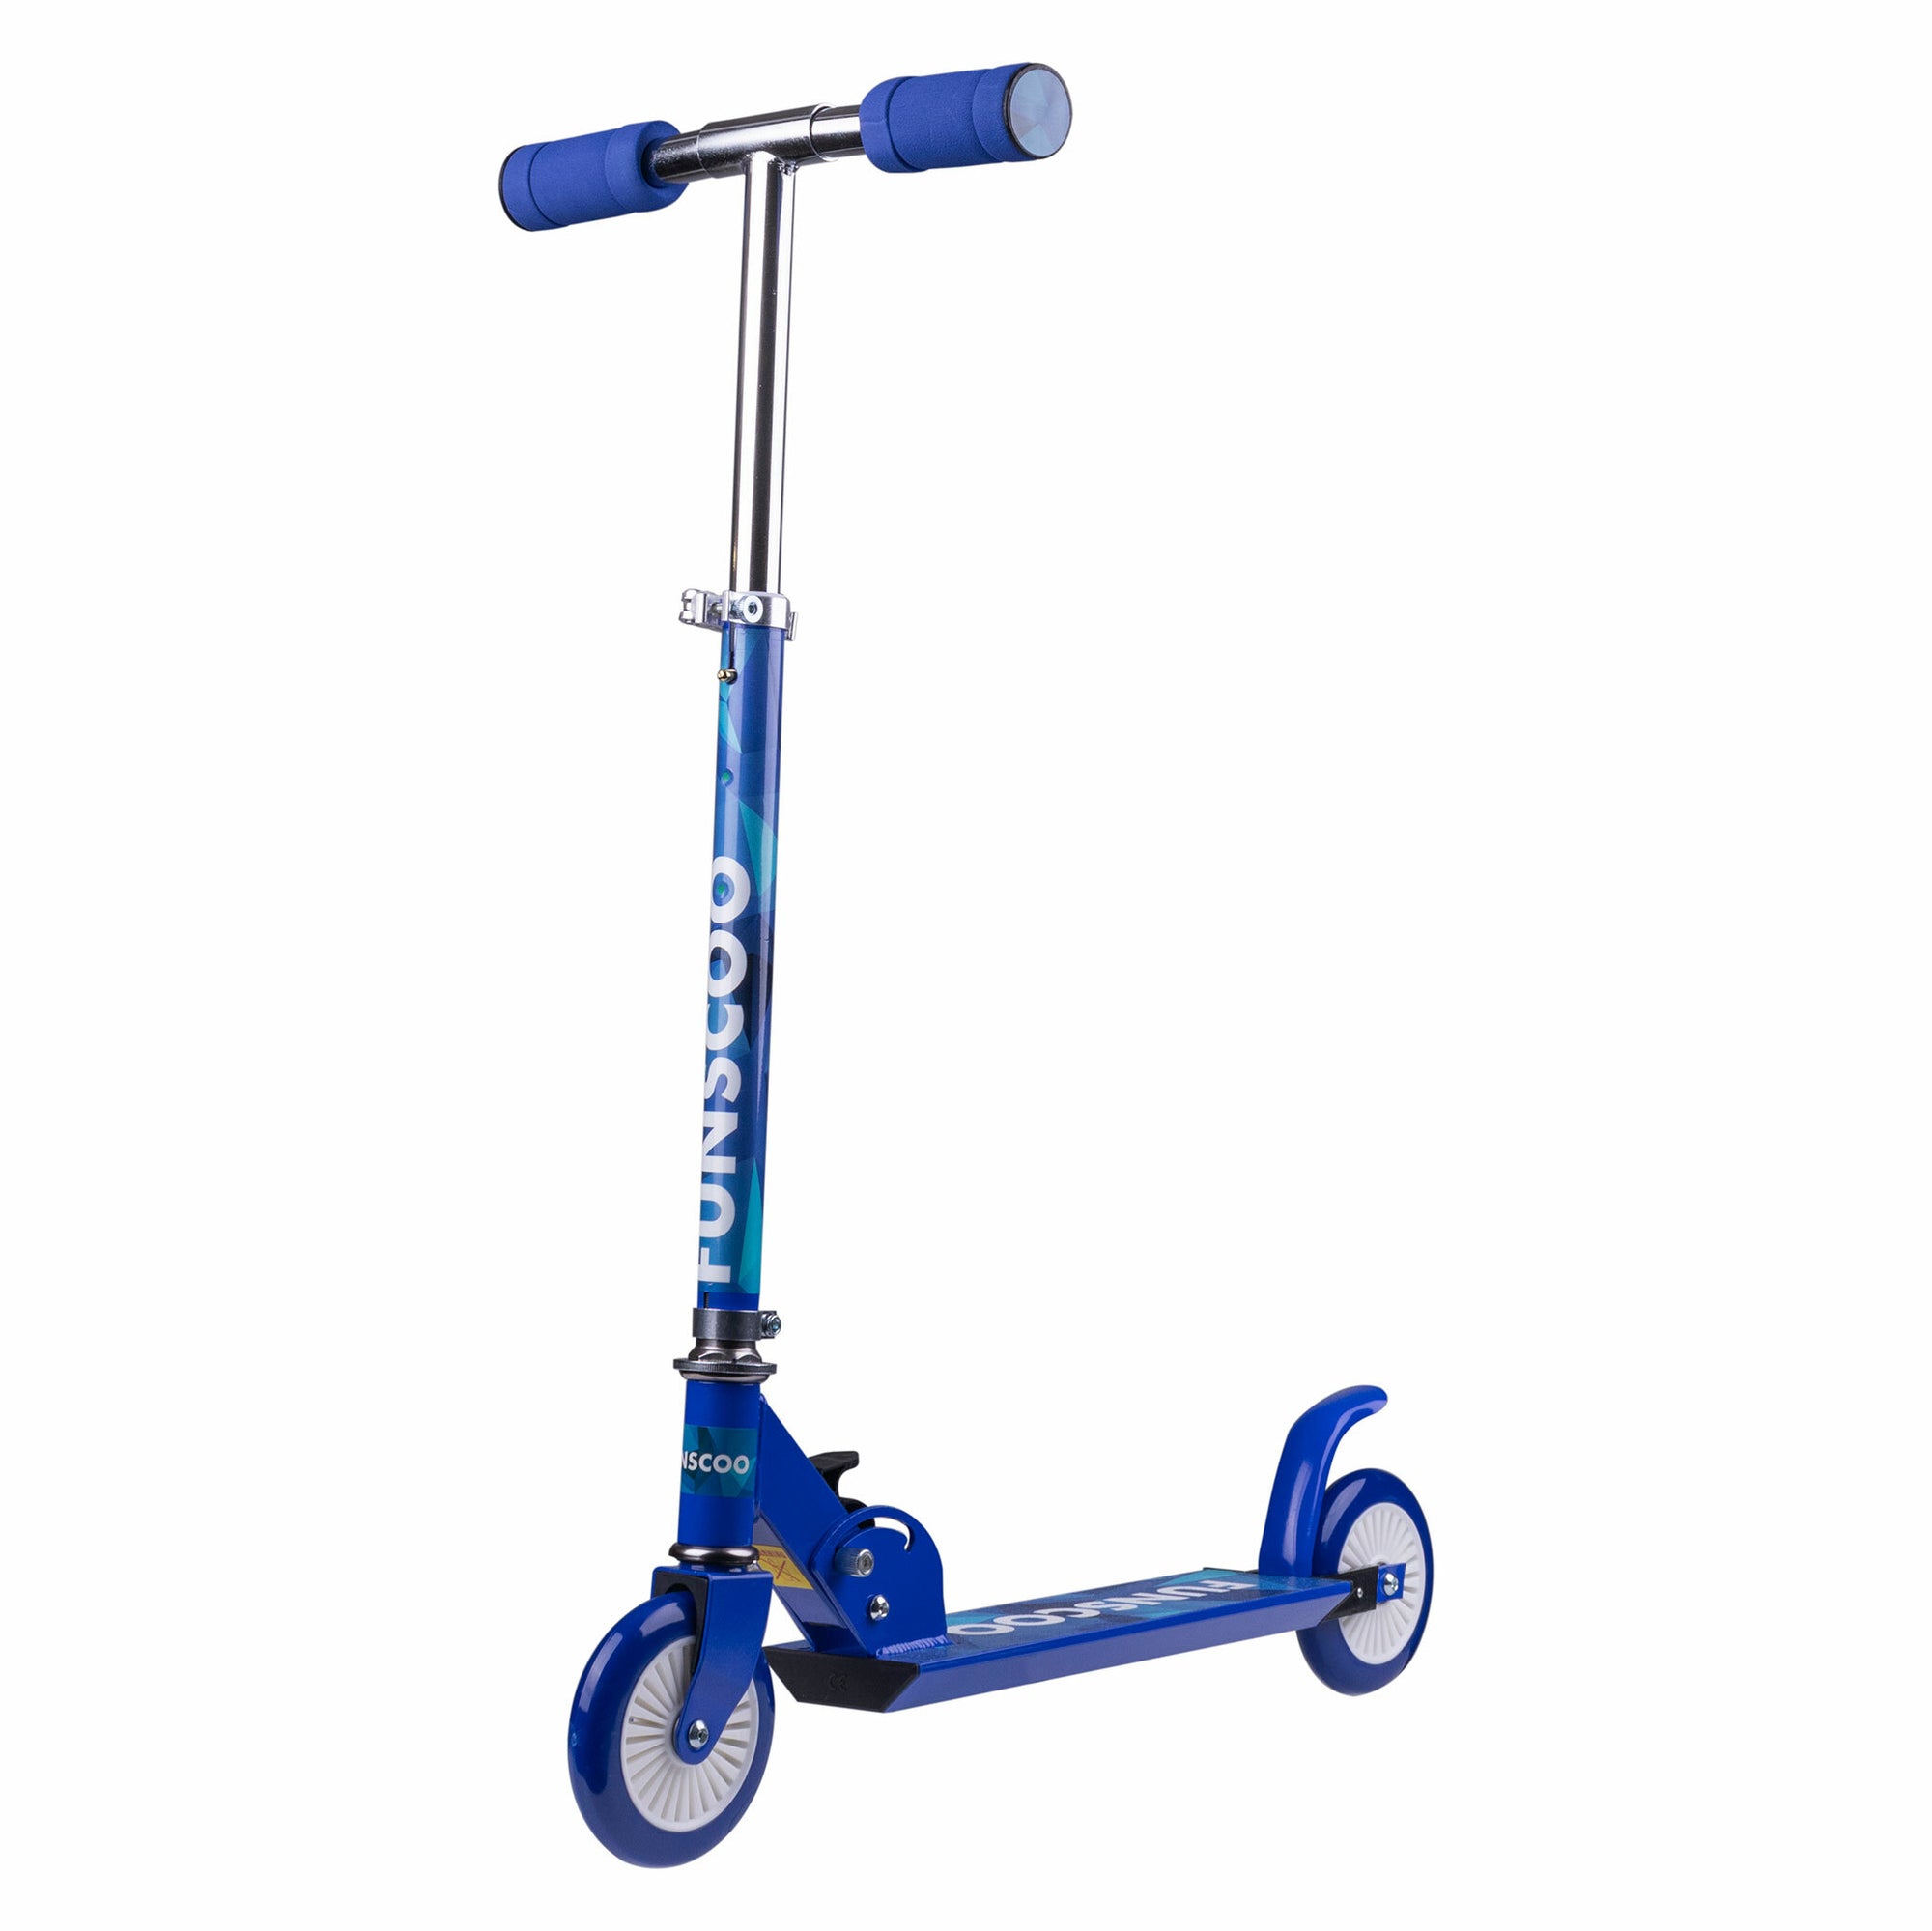 Funscoo Snowscooter 2-IN-1 Blue